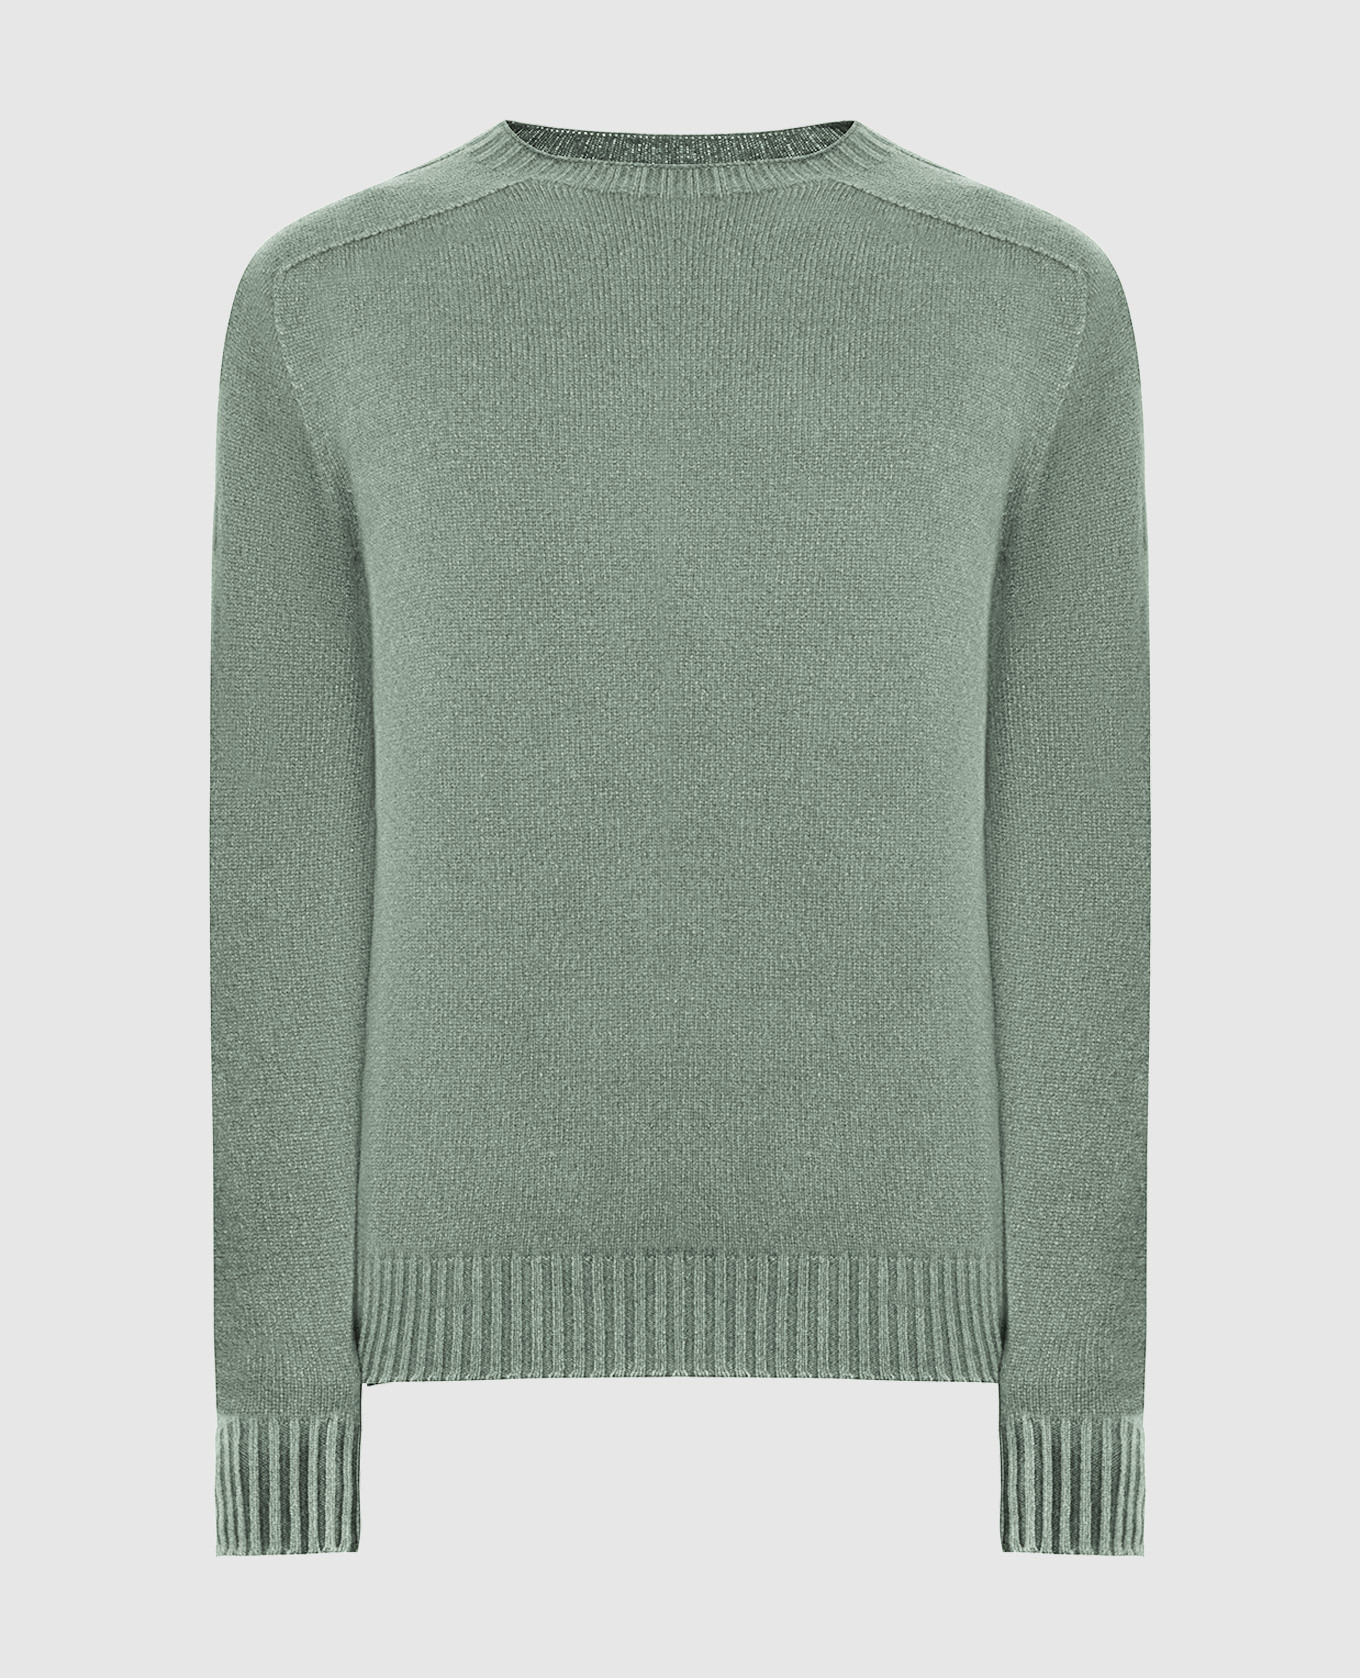 Two-sided green cashmere jumper